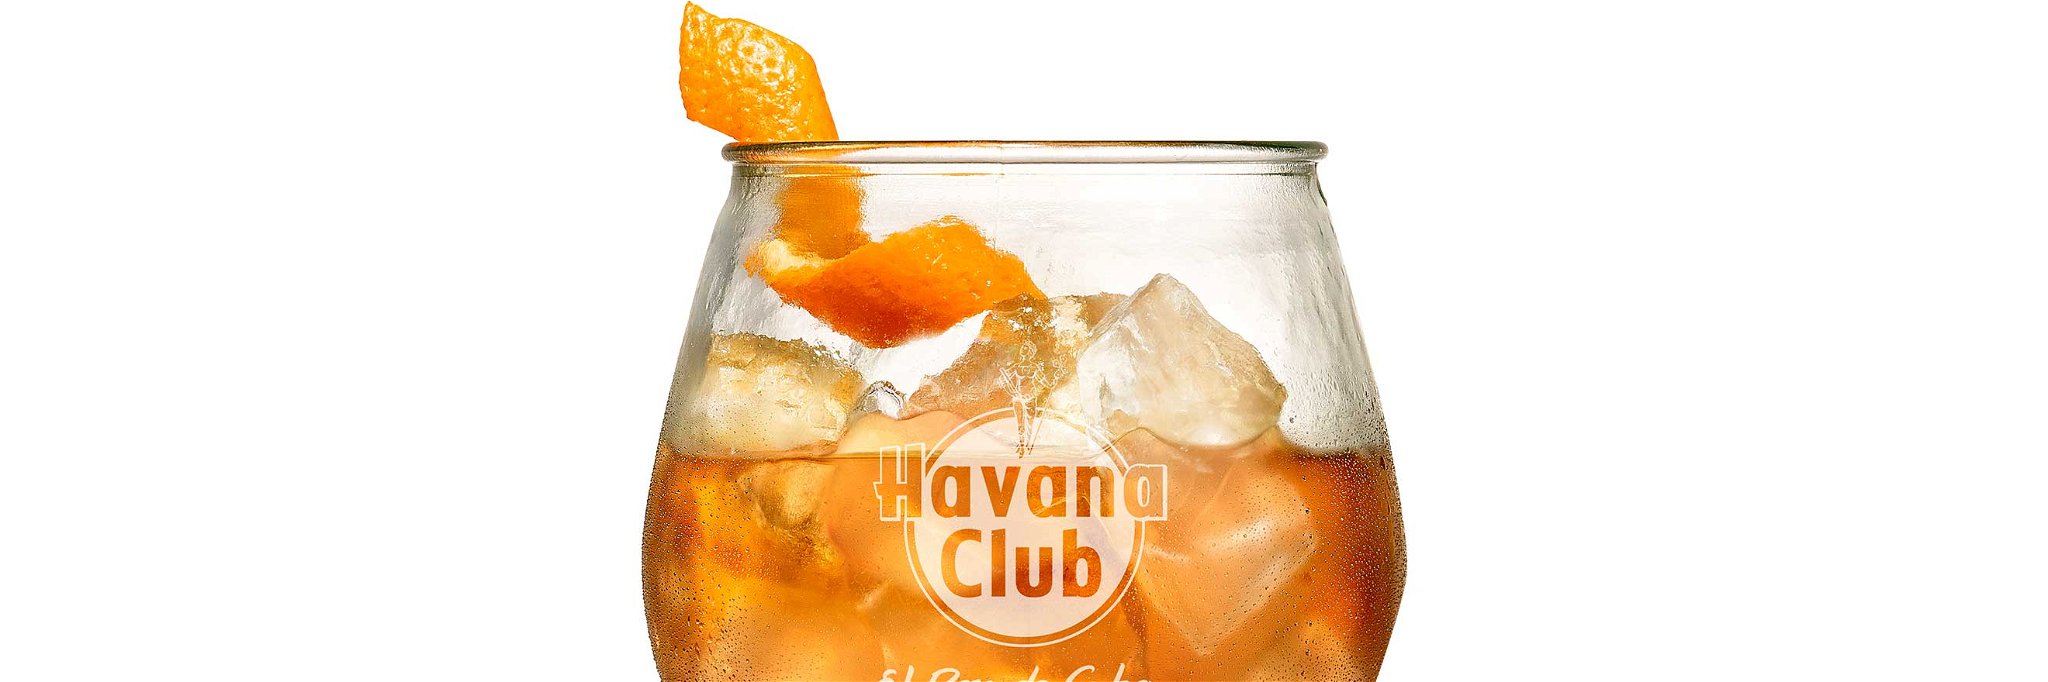 This signature drink is made with Havana Club Añejo 7 Años and Essence of Cuba.